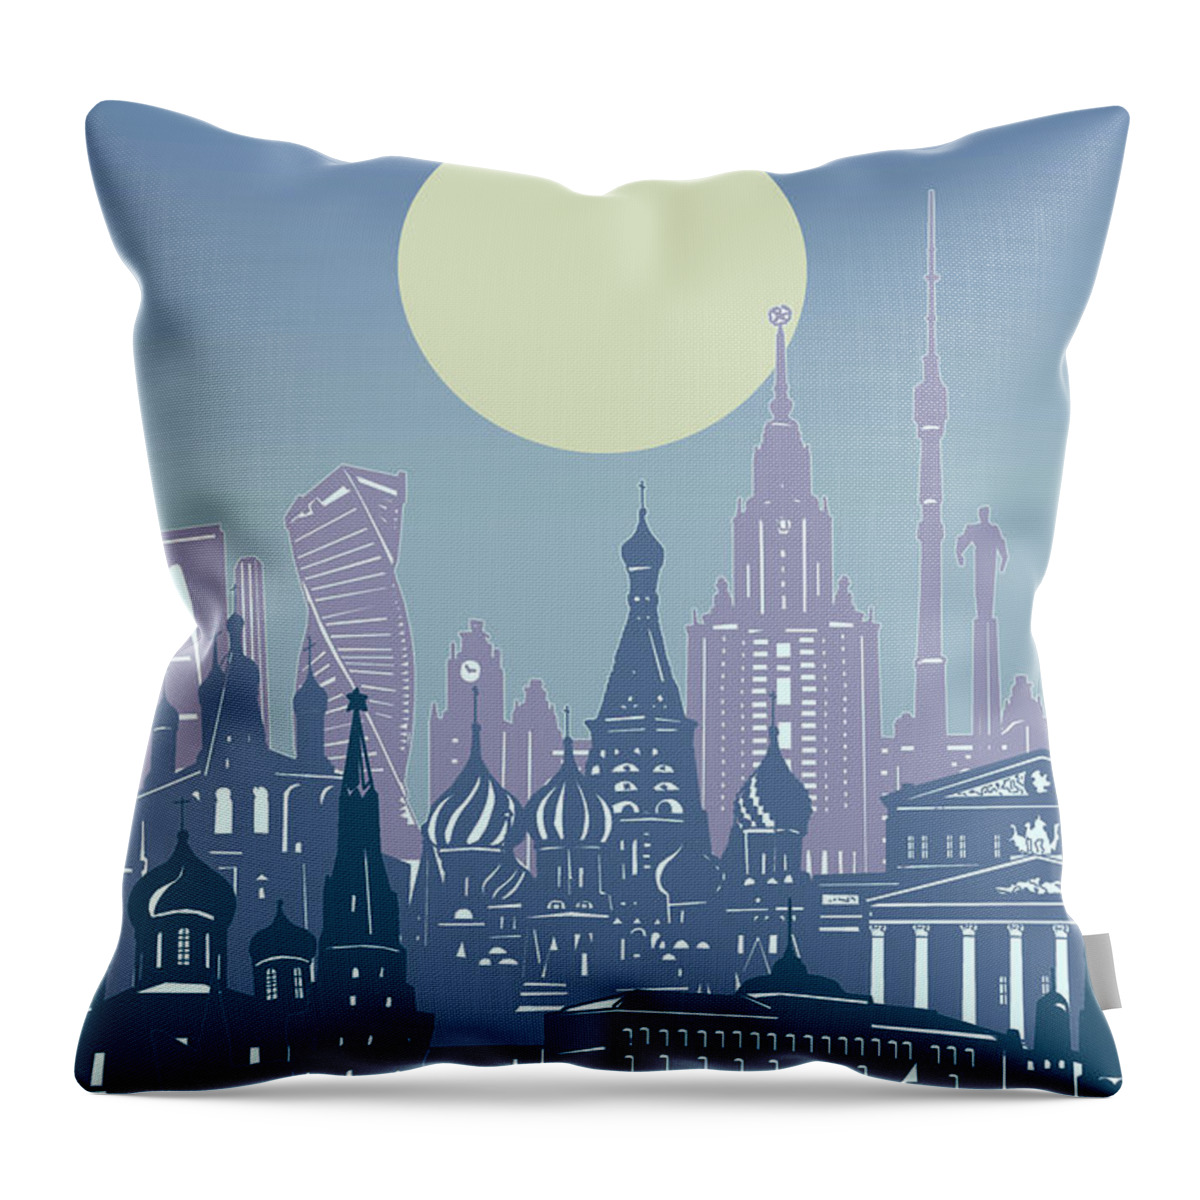 Moscow Throw Pillow featuring the digital art Moscow Skyline Minimal Blue by Bekim M